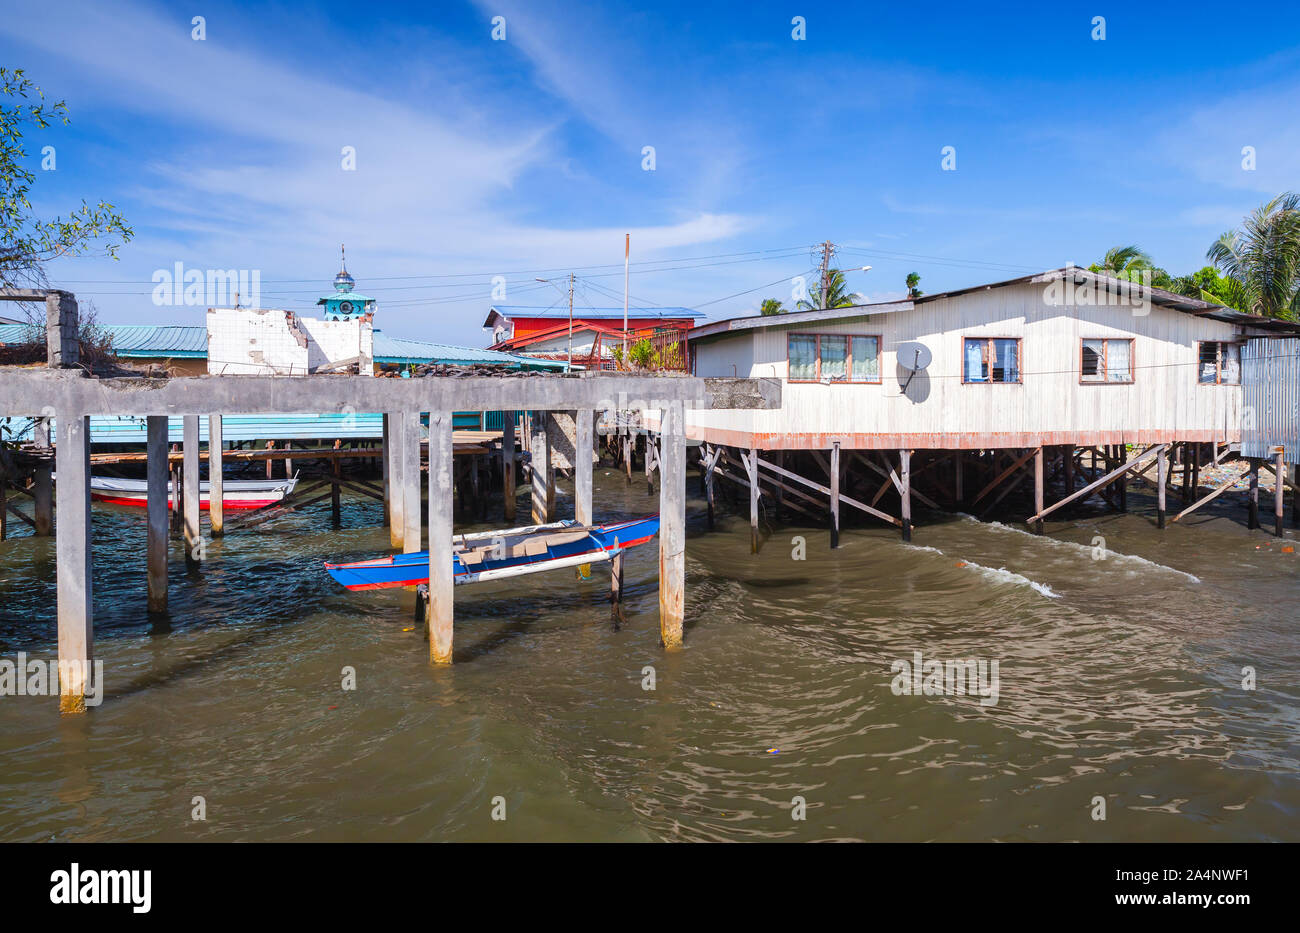 Wooden houses, bridges and barns on stilts. View of the poor district of Kota Kinabalu, Sabah, Malaysia Stock Photo